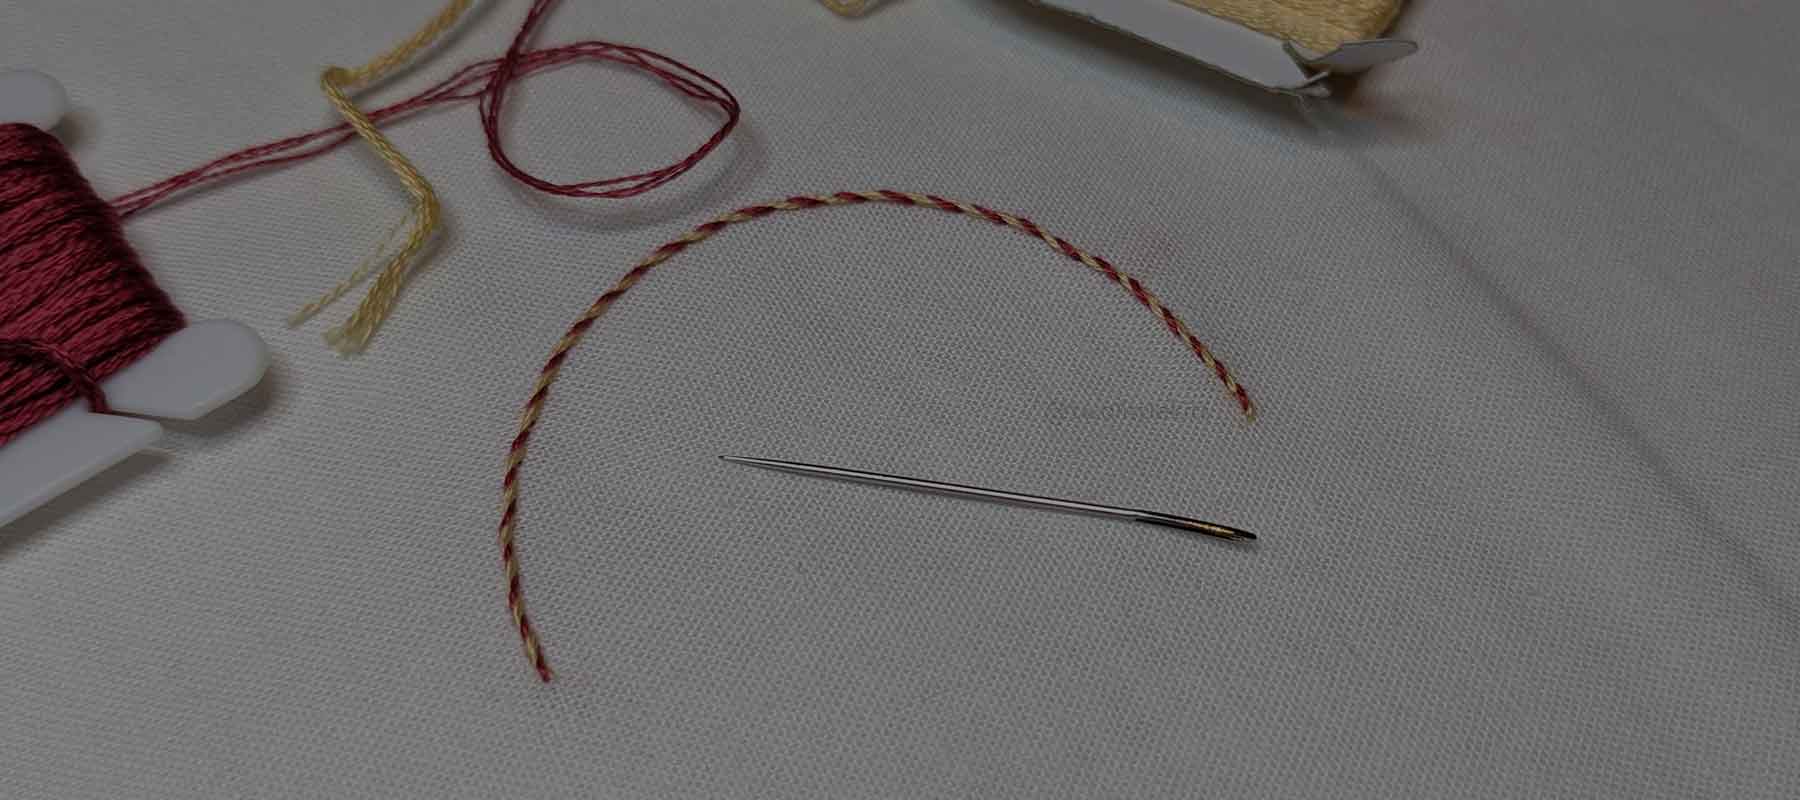 Whipped Back Stitch // Hand Embroidery Stitches